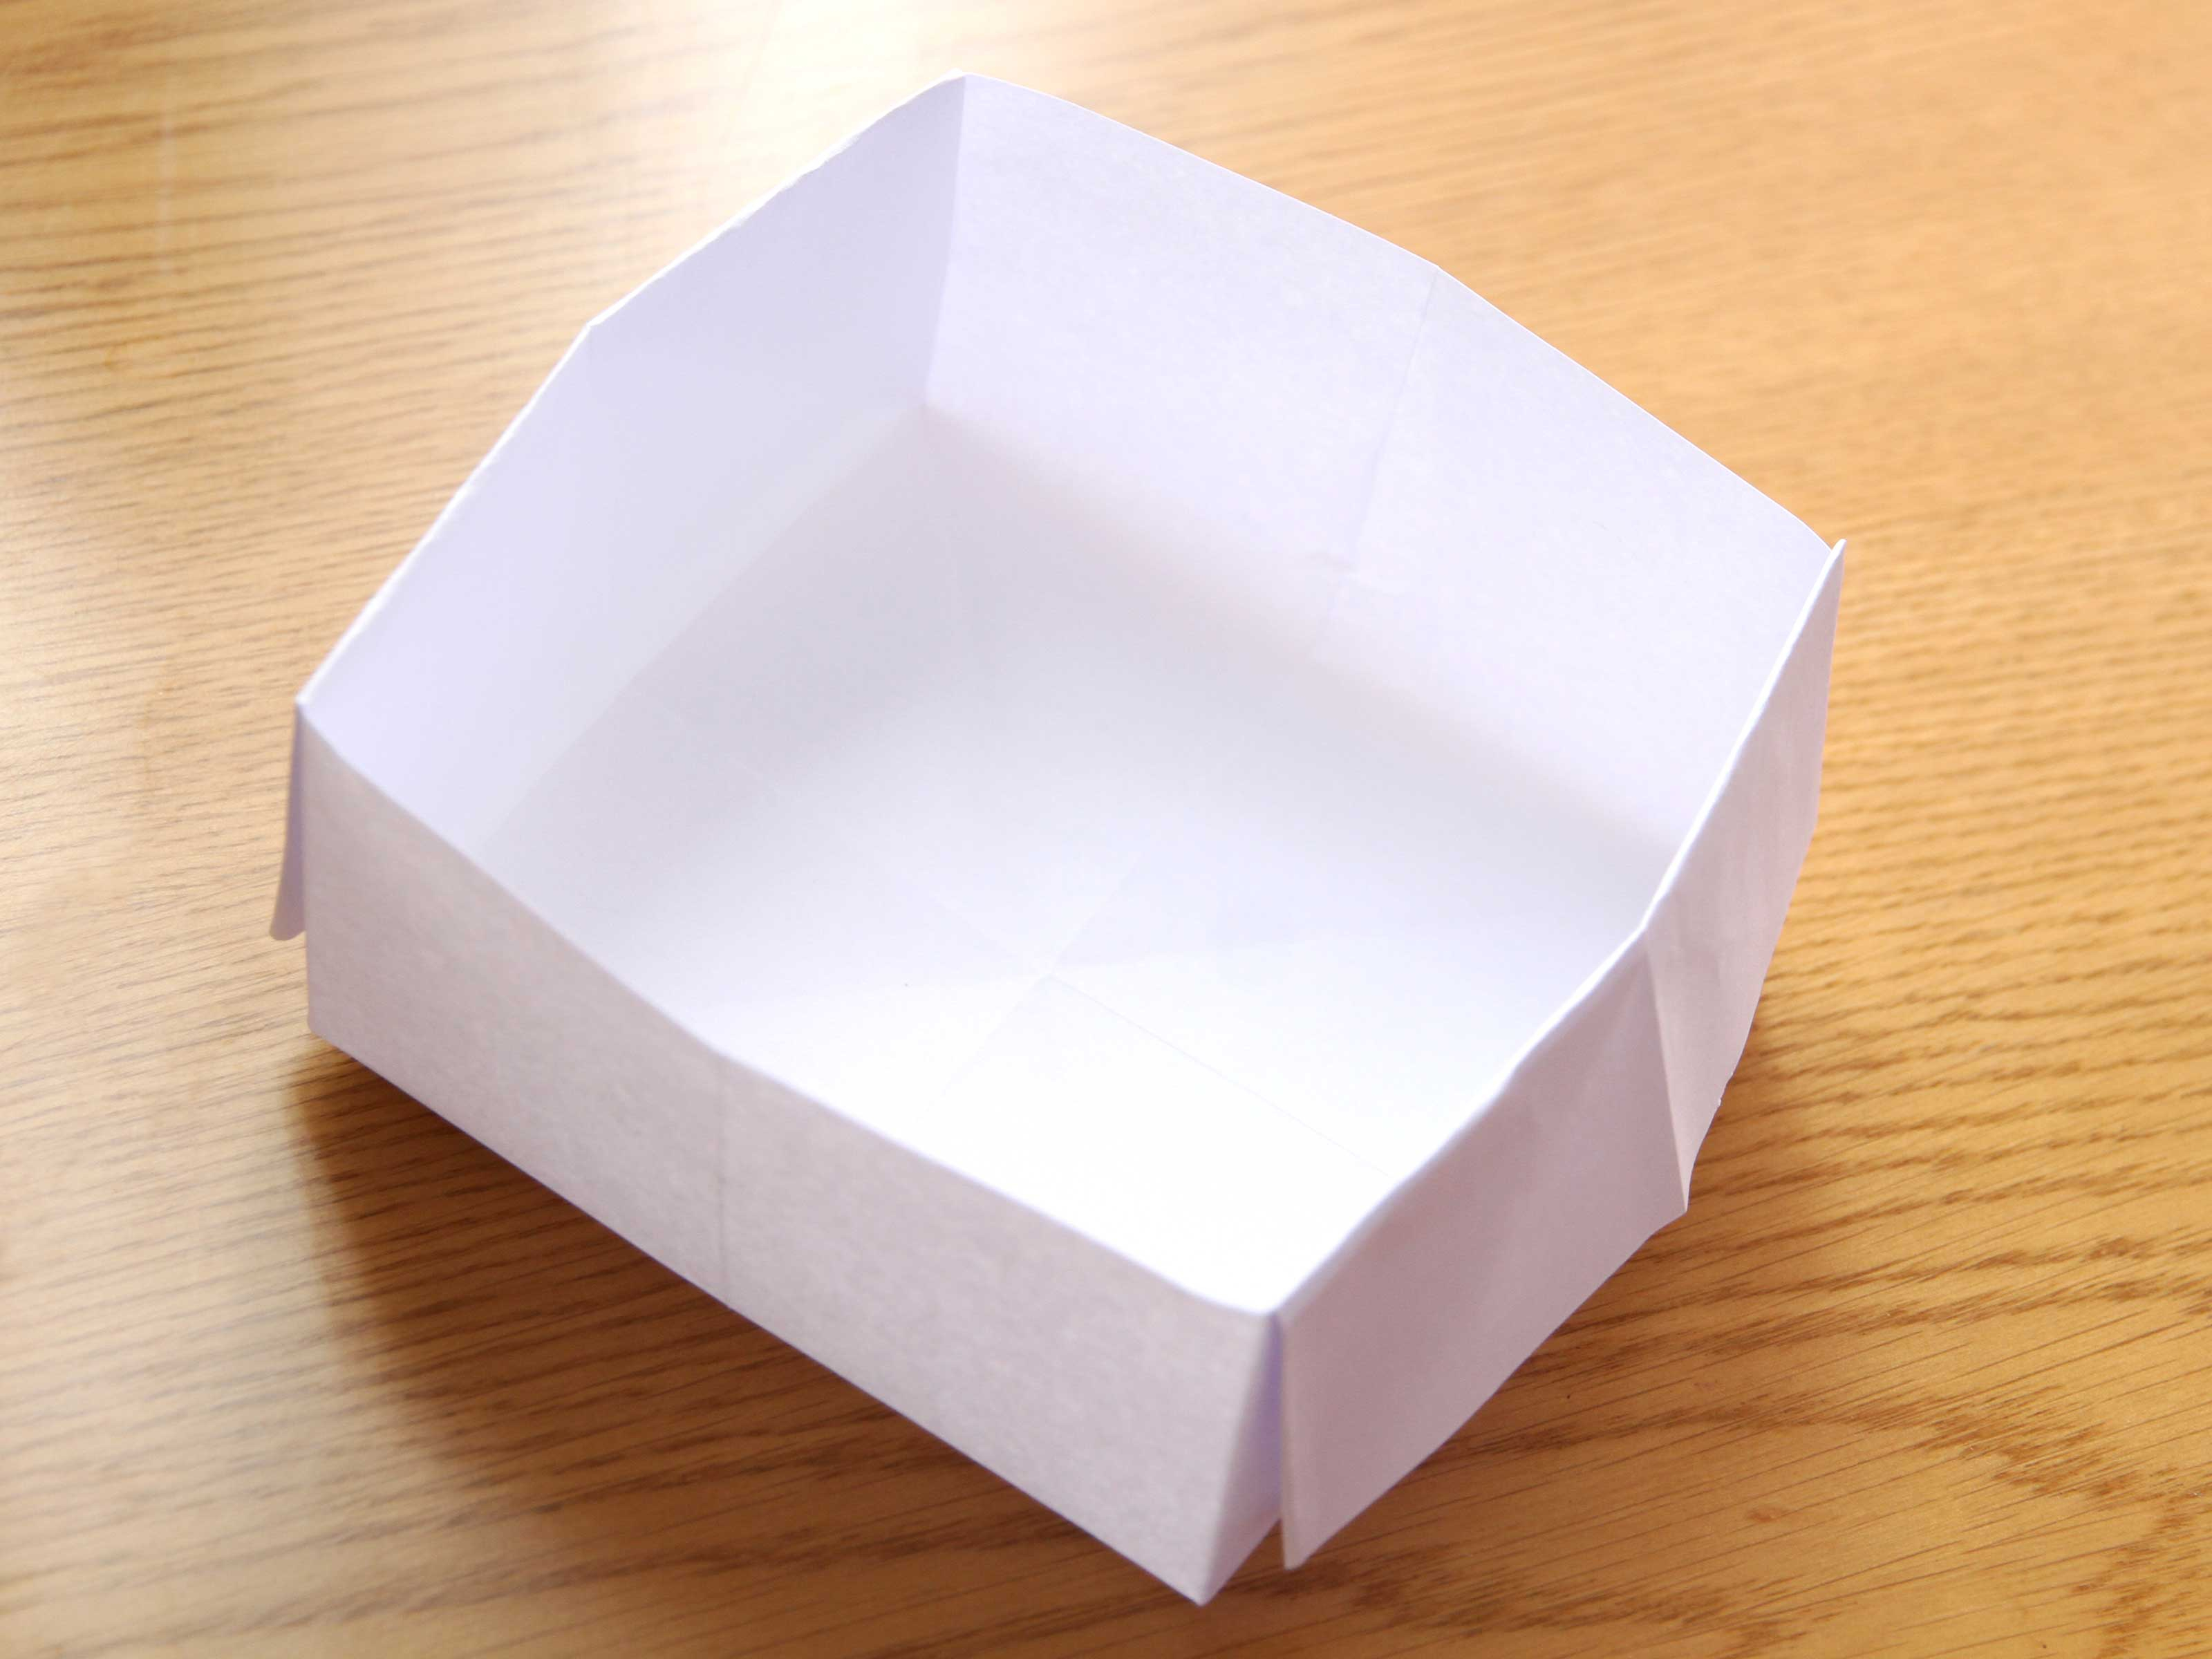 How To Make Easy Origami Box How To Make An Origami Box With Printer Paper 12 Steps